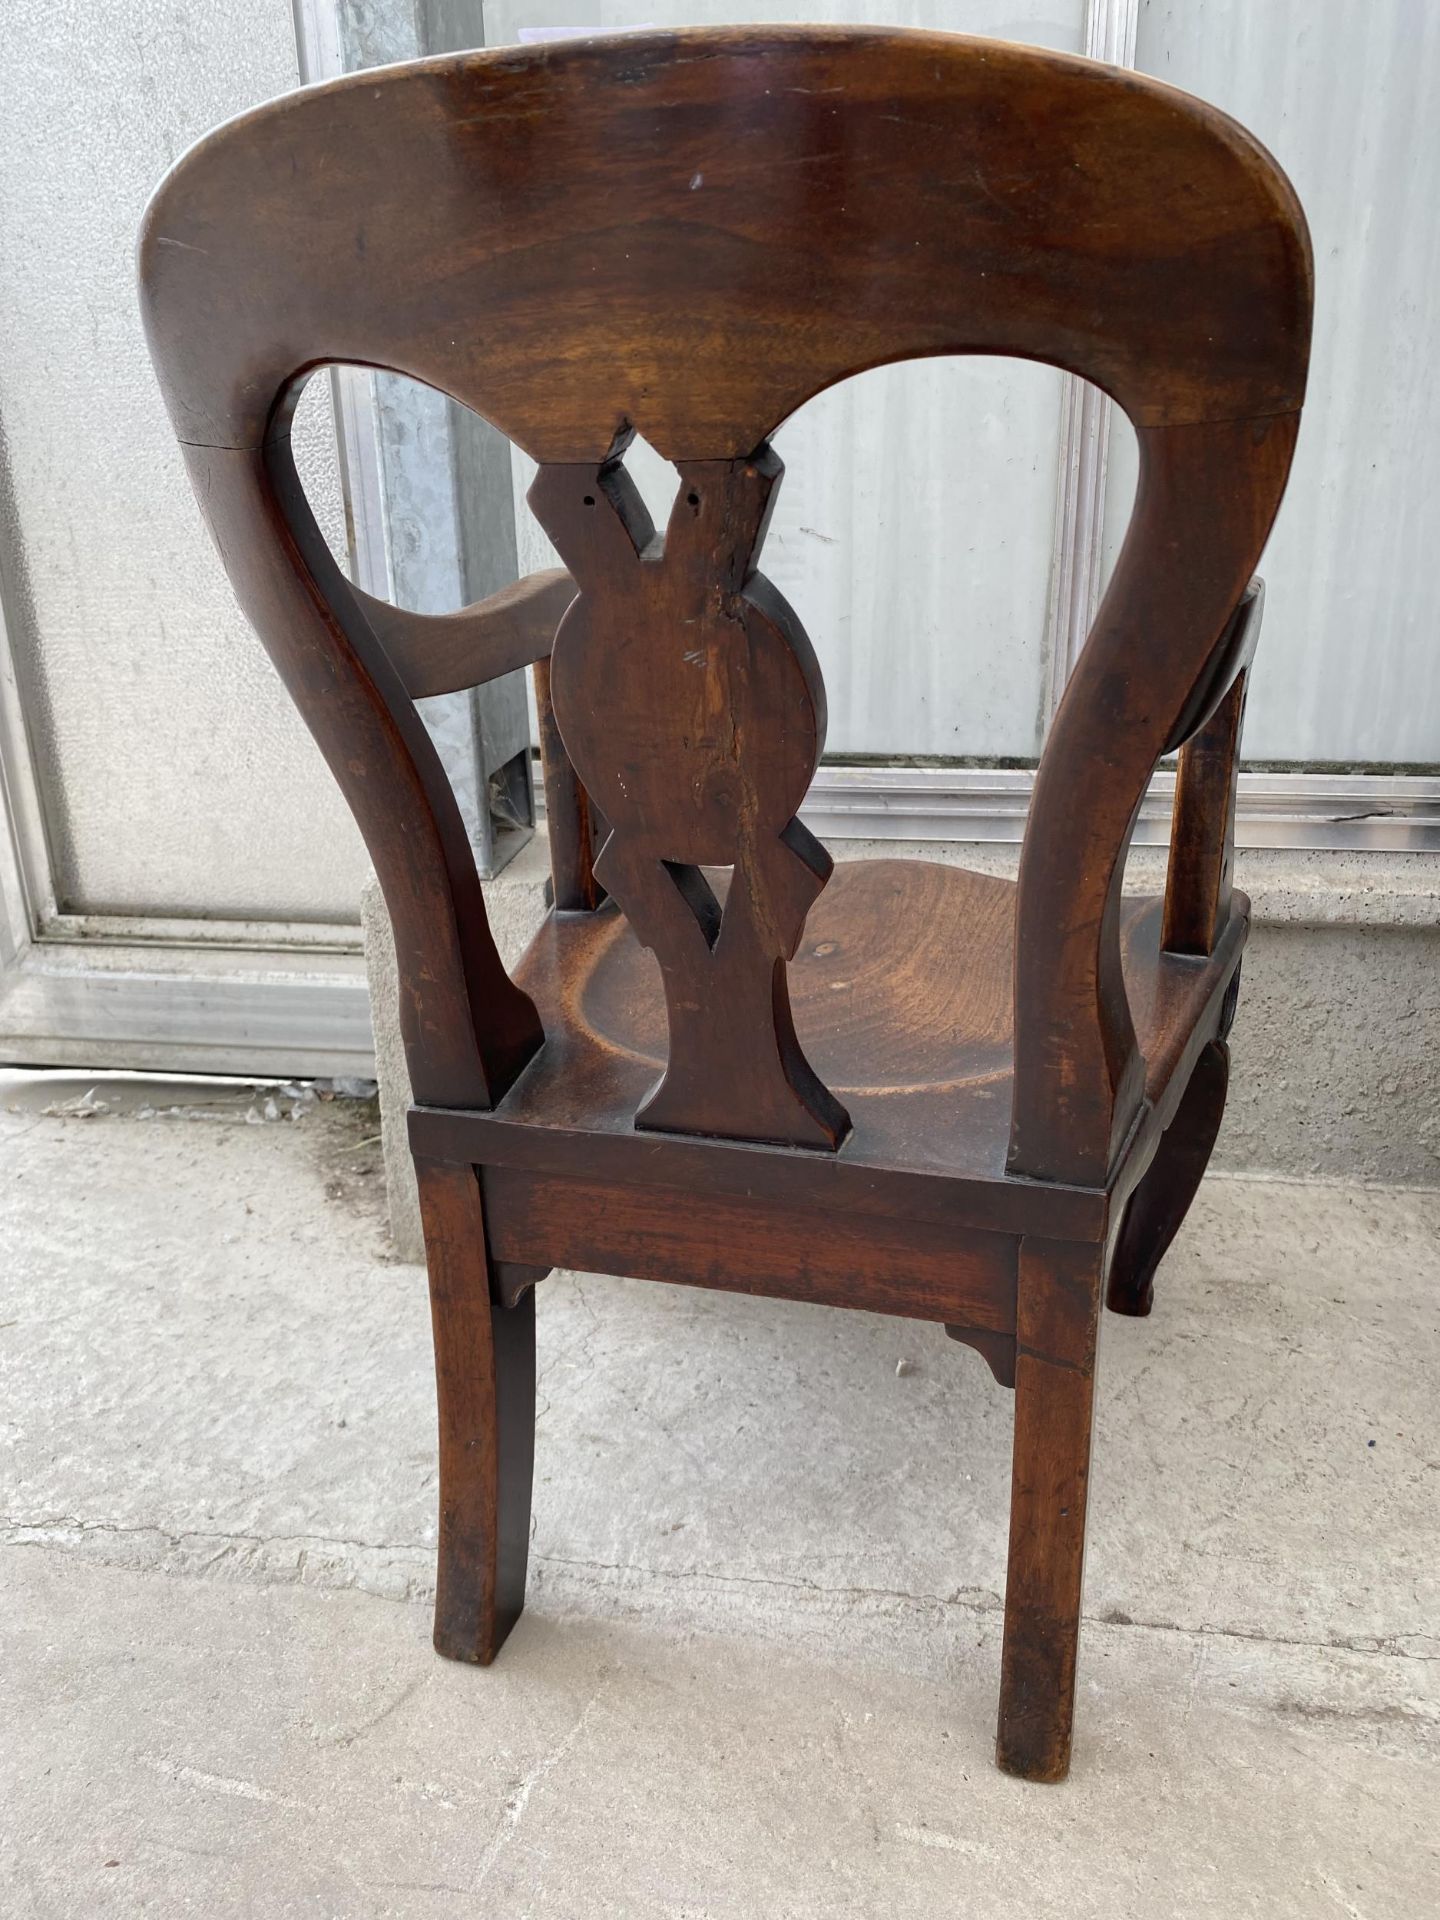 A VICTORIAN MAHOGANY CHILD'S ELBOW CHAIR WITH FRONT CABRIOLE LEGS - Image 3 of 4